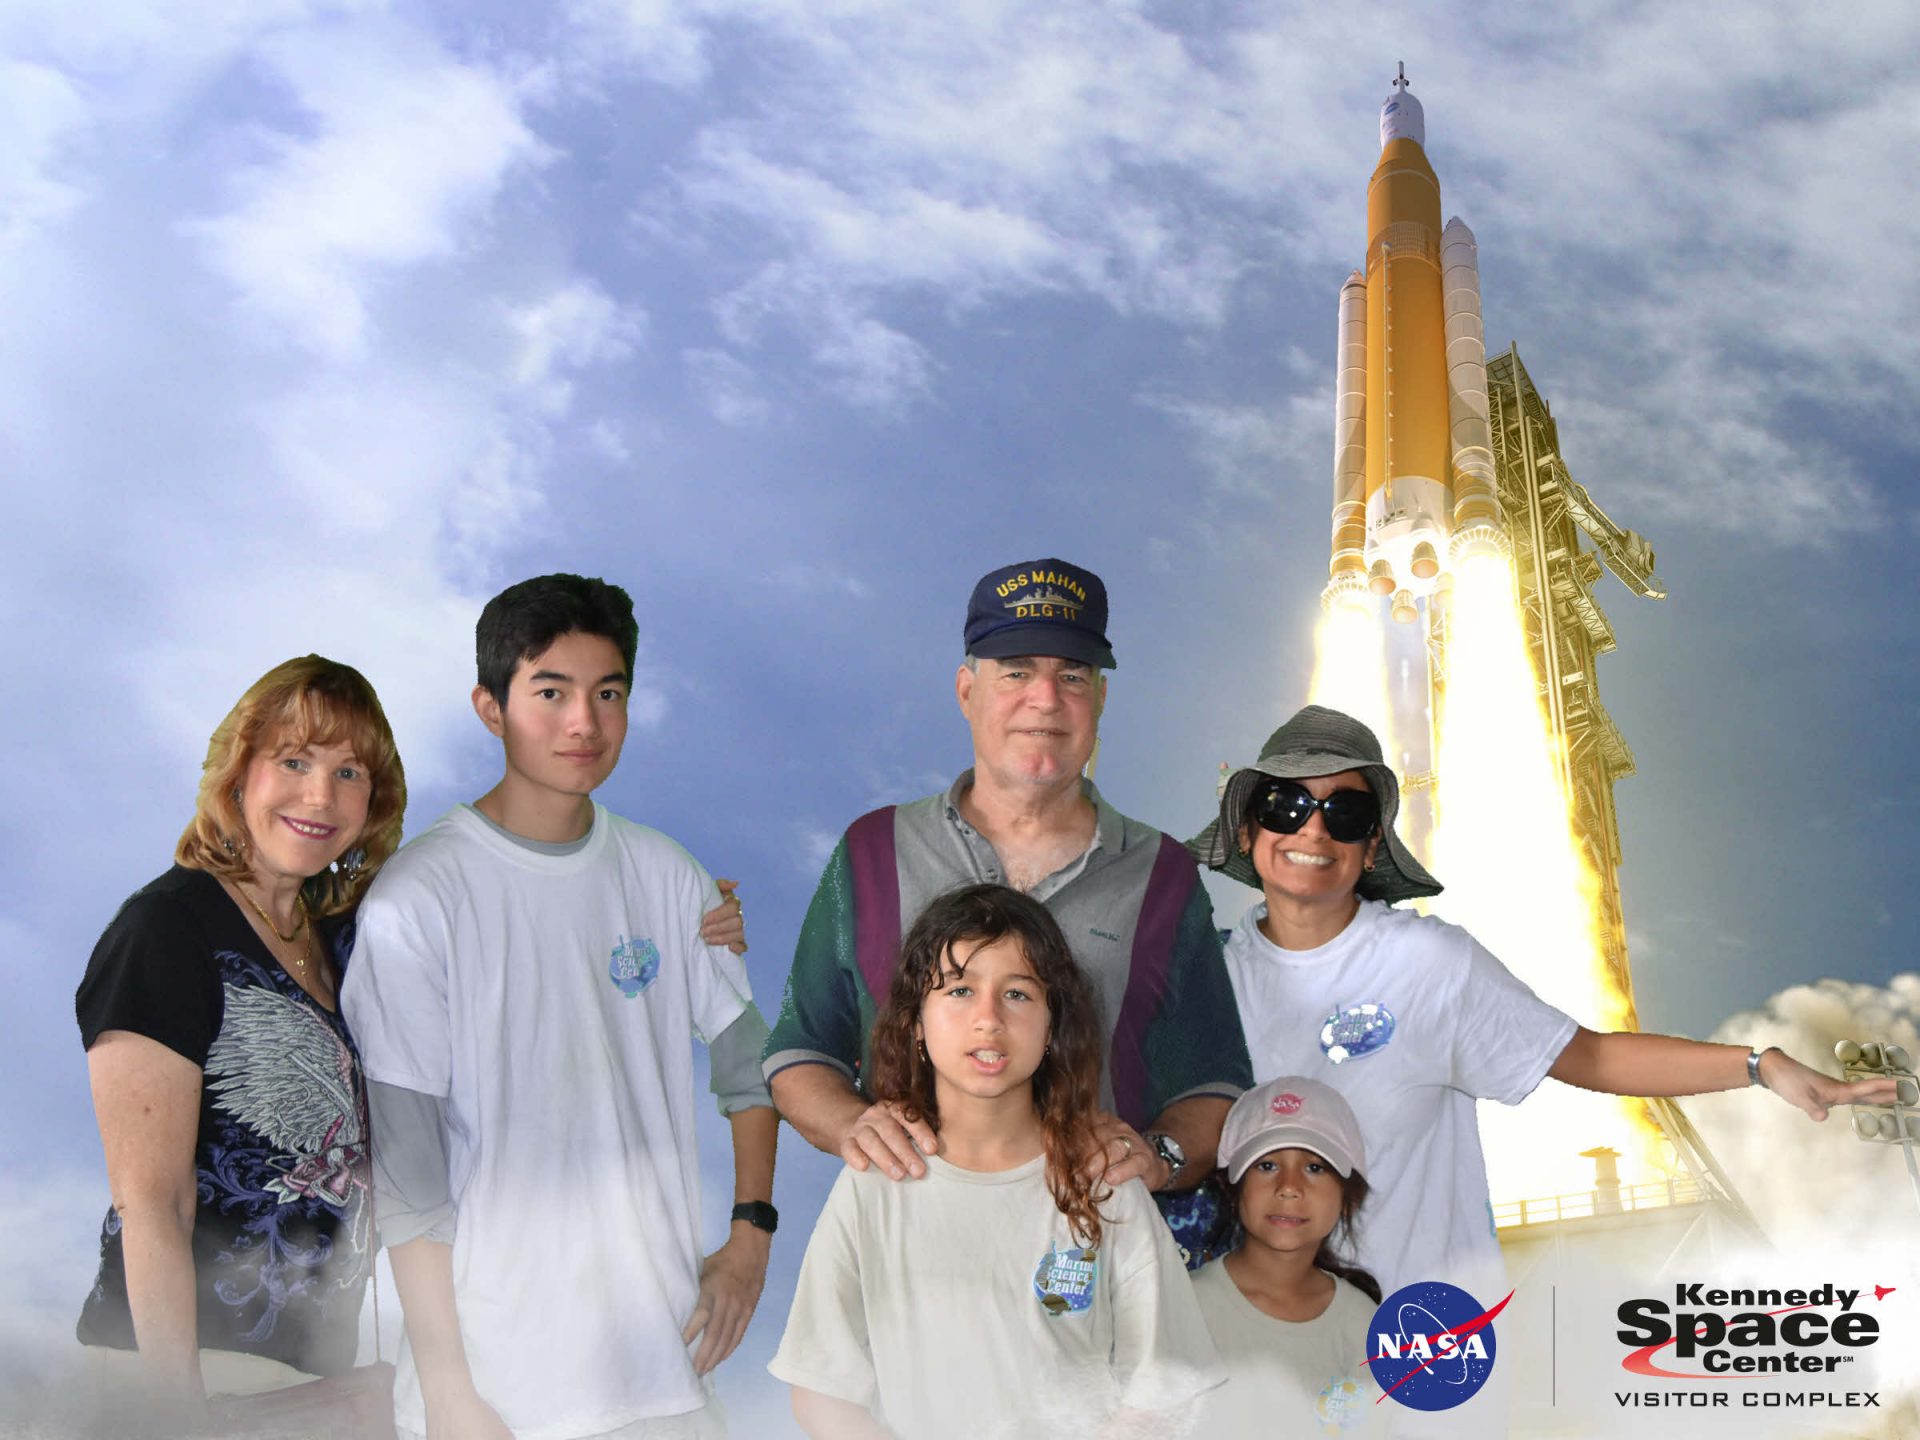 Tracey, Corbin, Tom, Kendall, Khori, & Jess. Kennedy Space Center.<br />
March 2019.